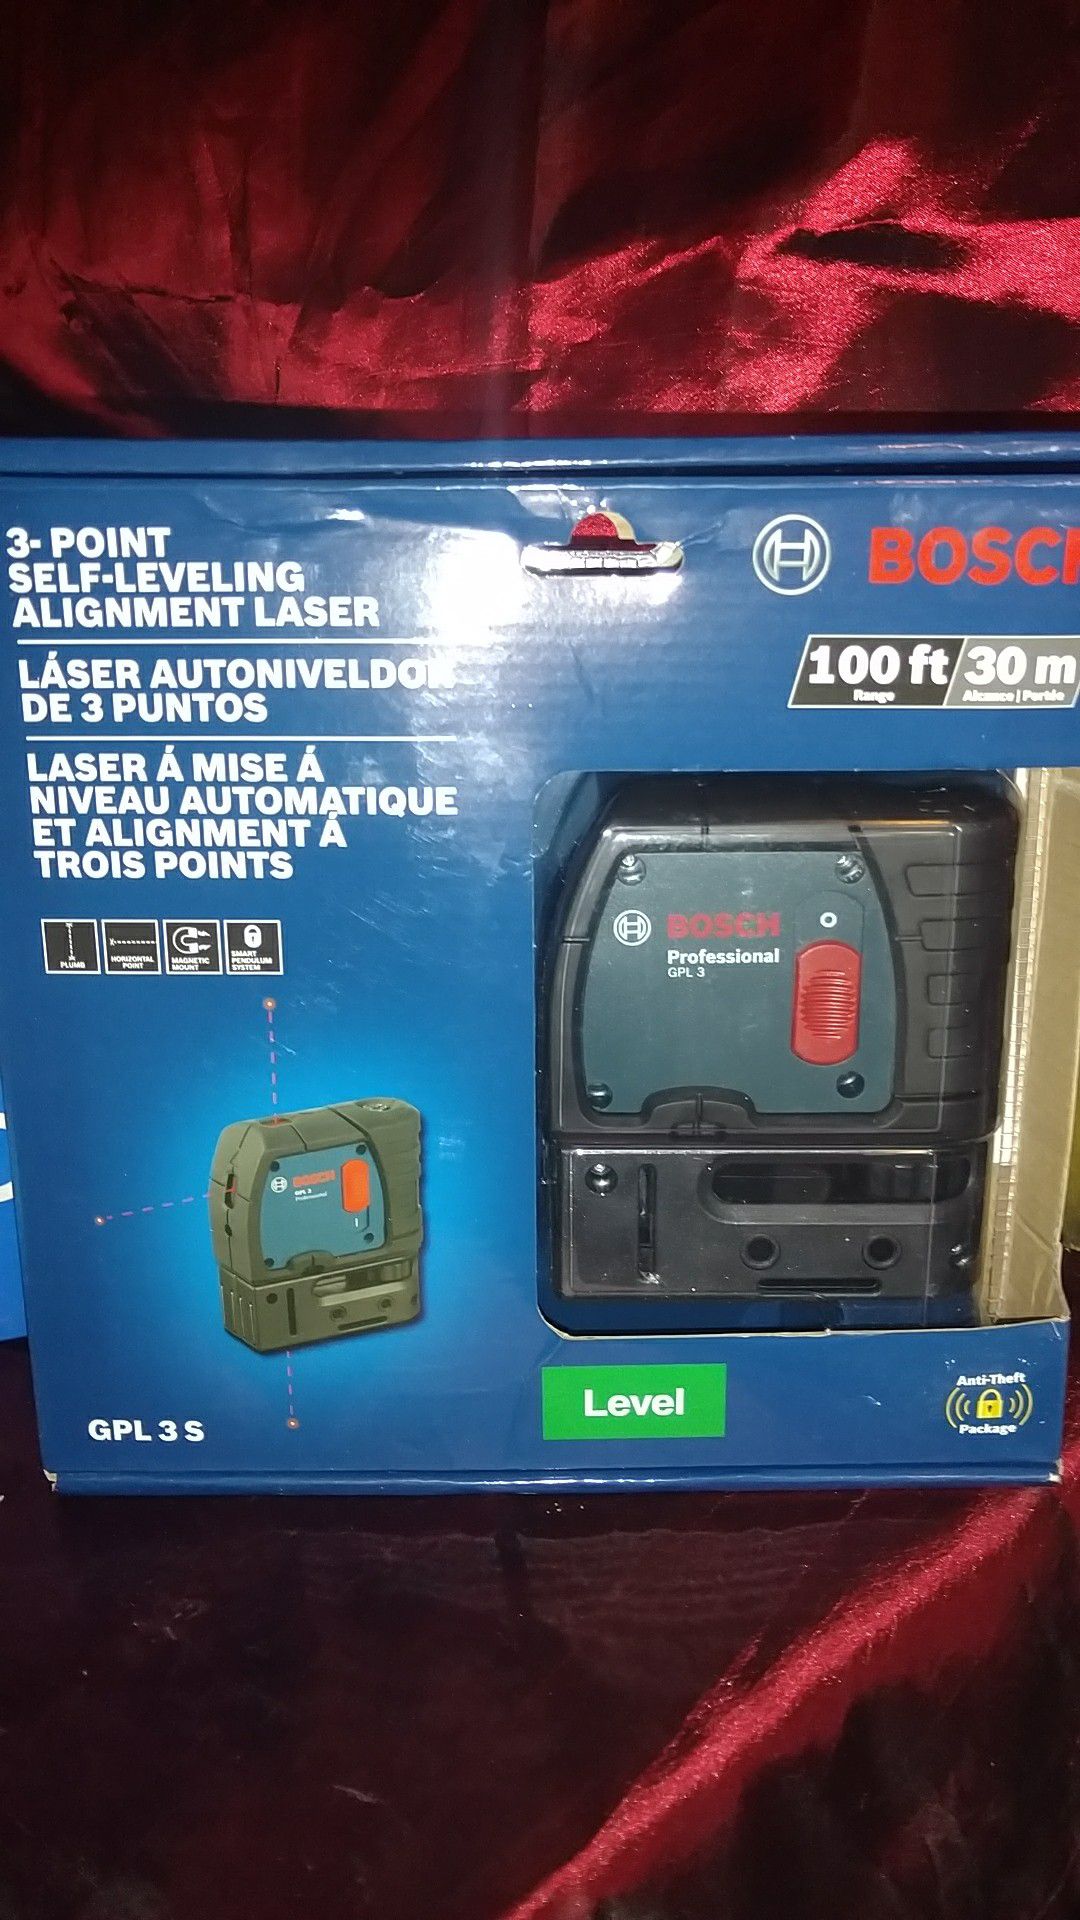 Bosch 3 point self - leveling alignment laser